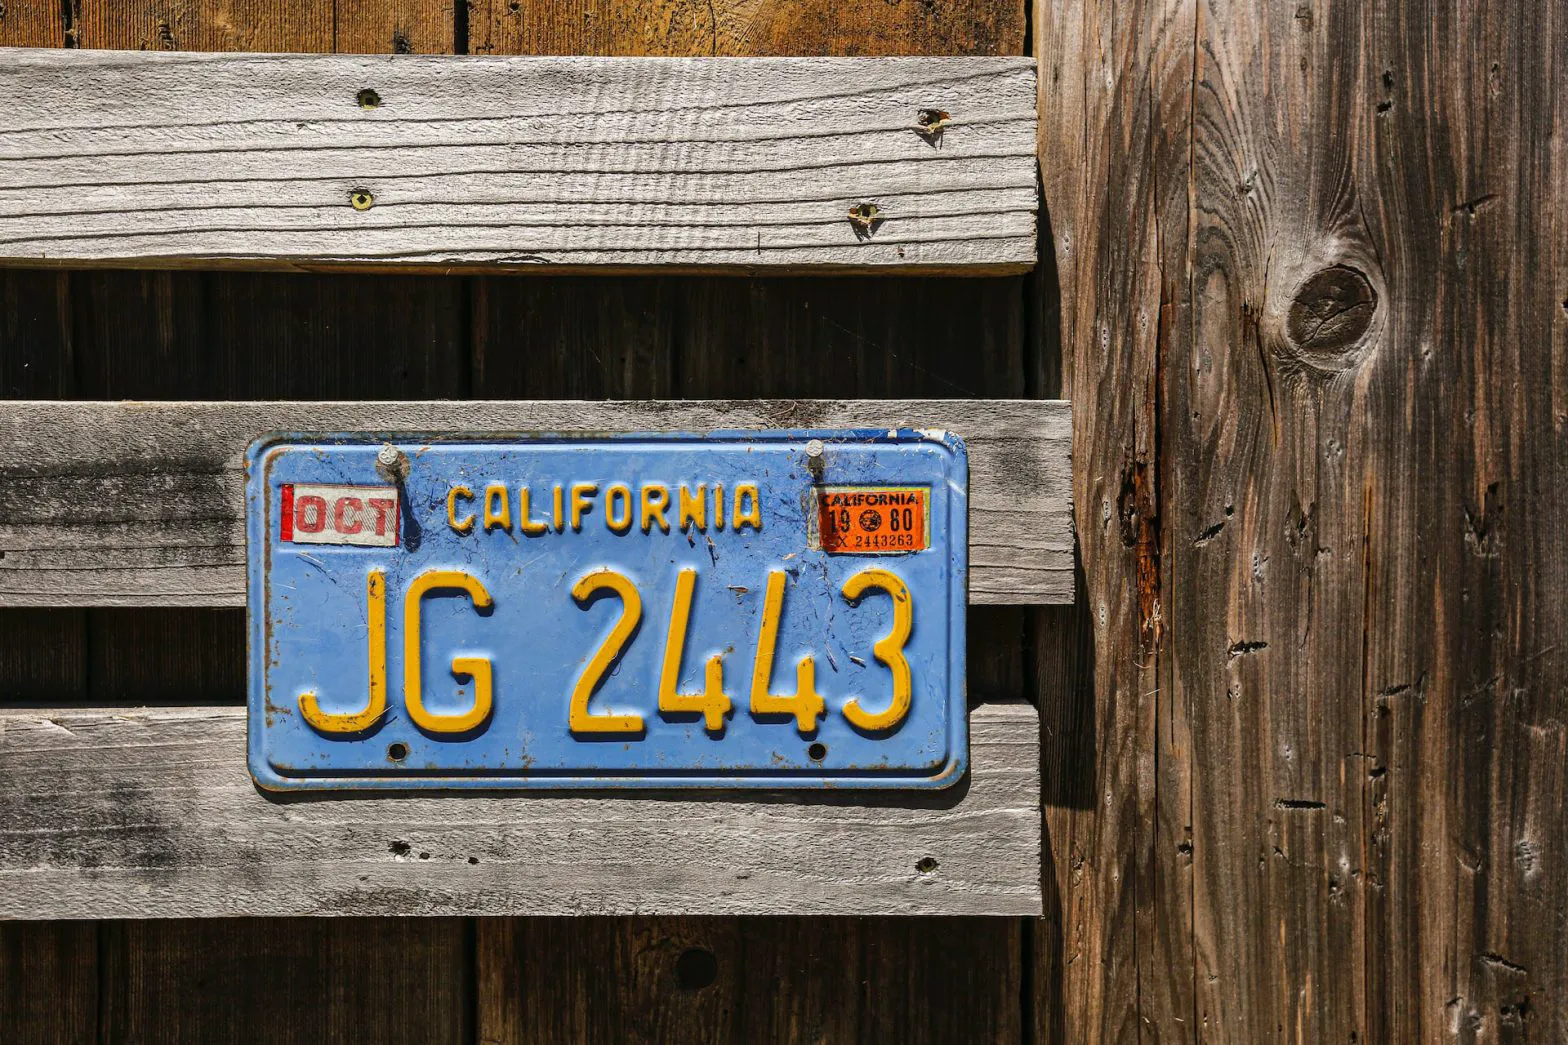 License Plate Decoder | Get Vehicle History, Titles & Value